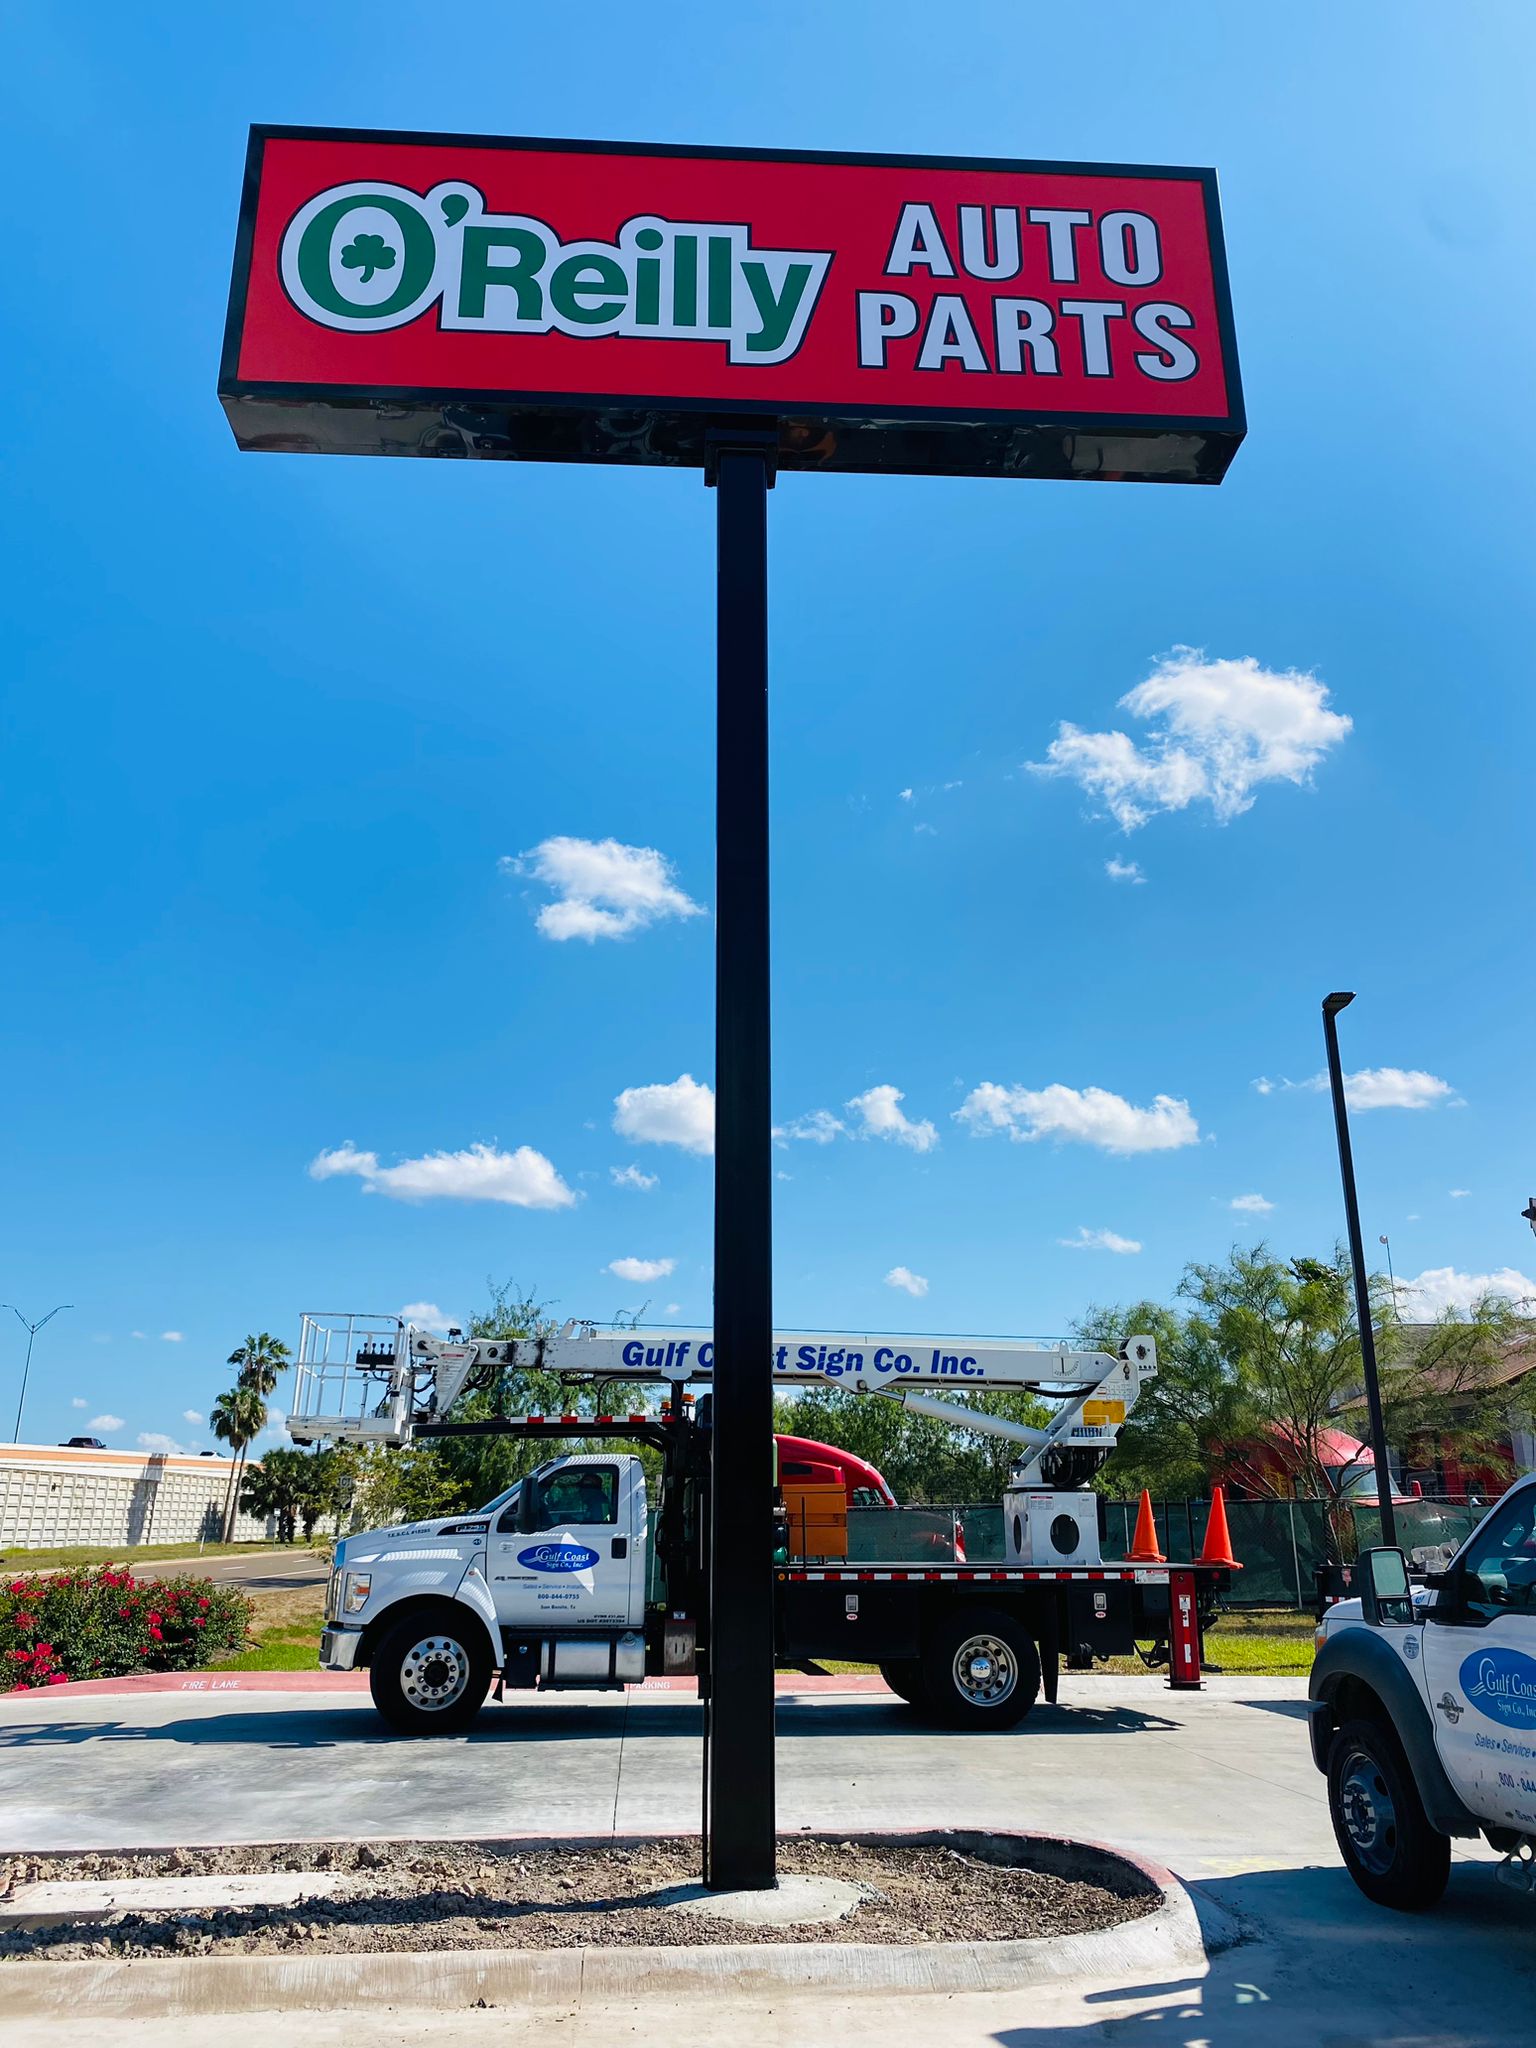 Elevated O'Reilly Auto Parts' brand visibility with a towering pylon sign, designed for durability and high-impact.